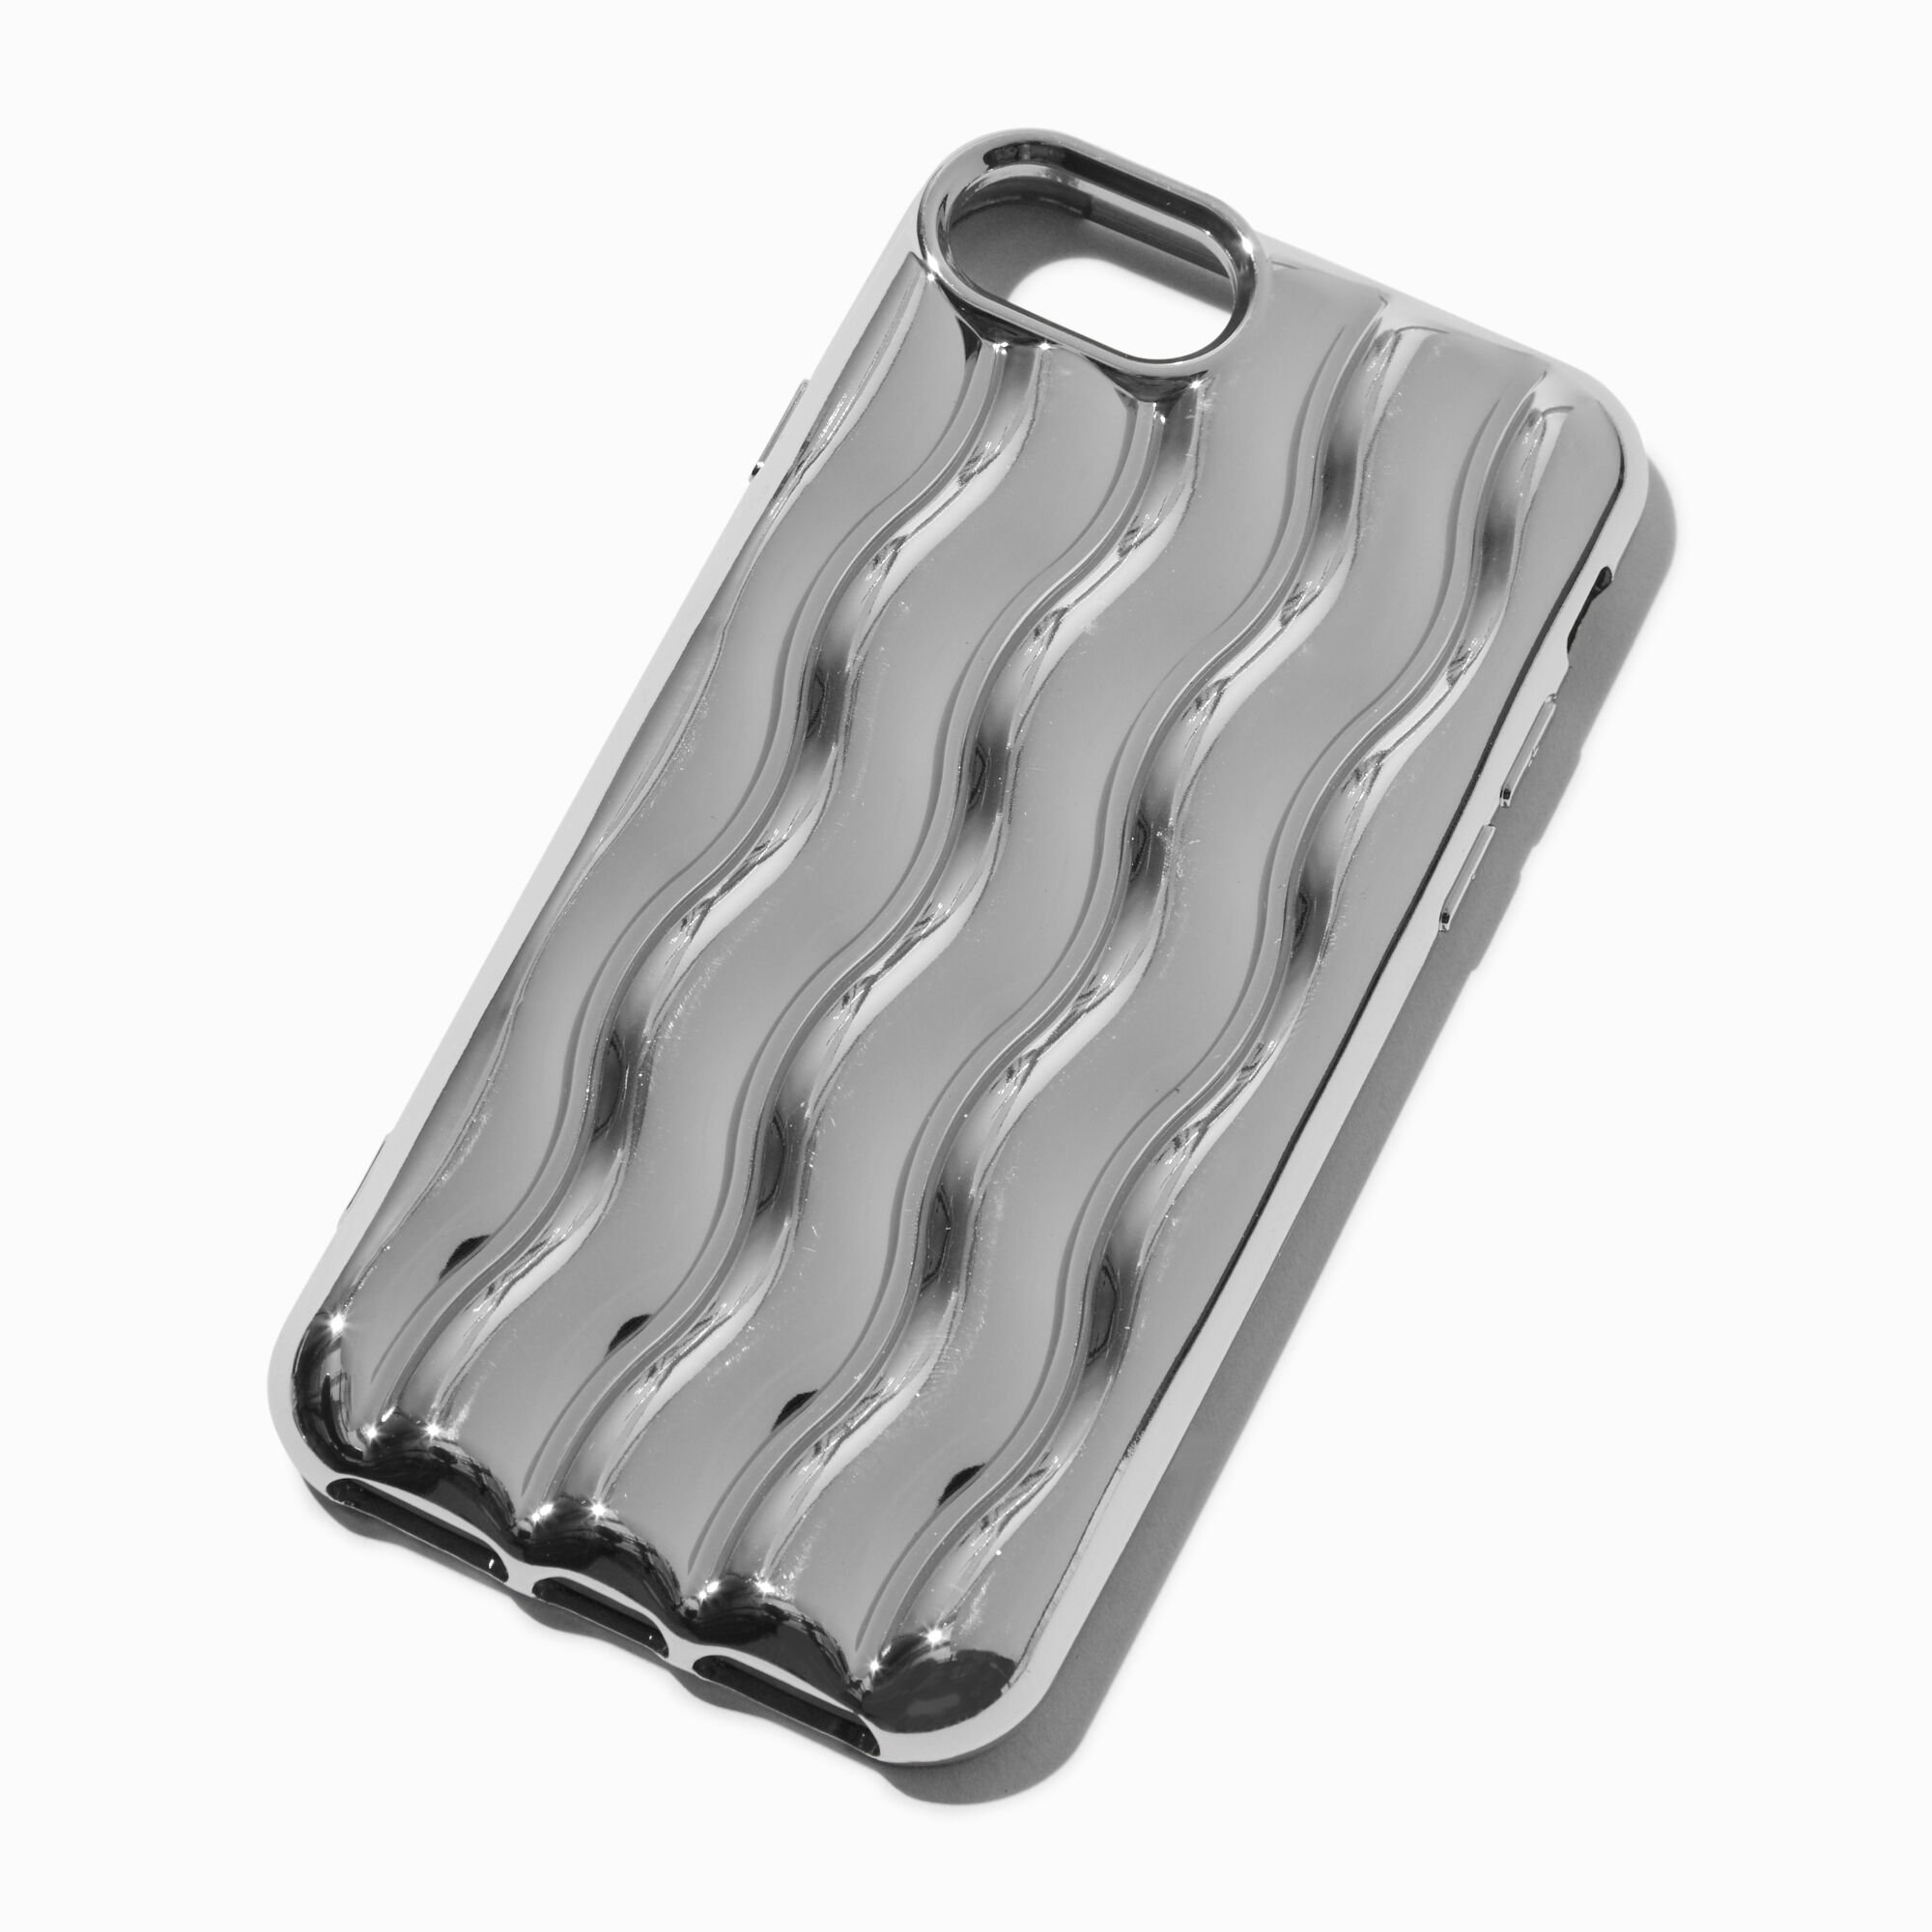 View Claires Waves Phone Case Fits Iphone 678se Silver information